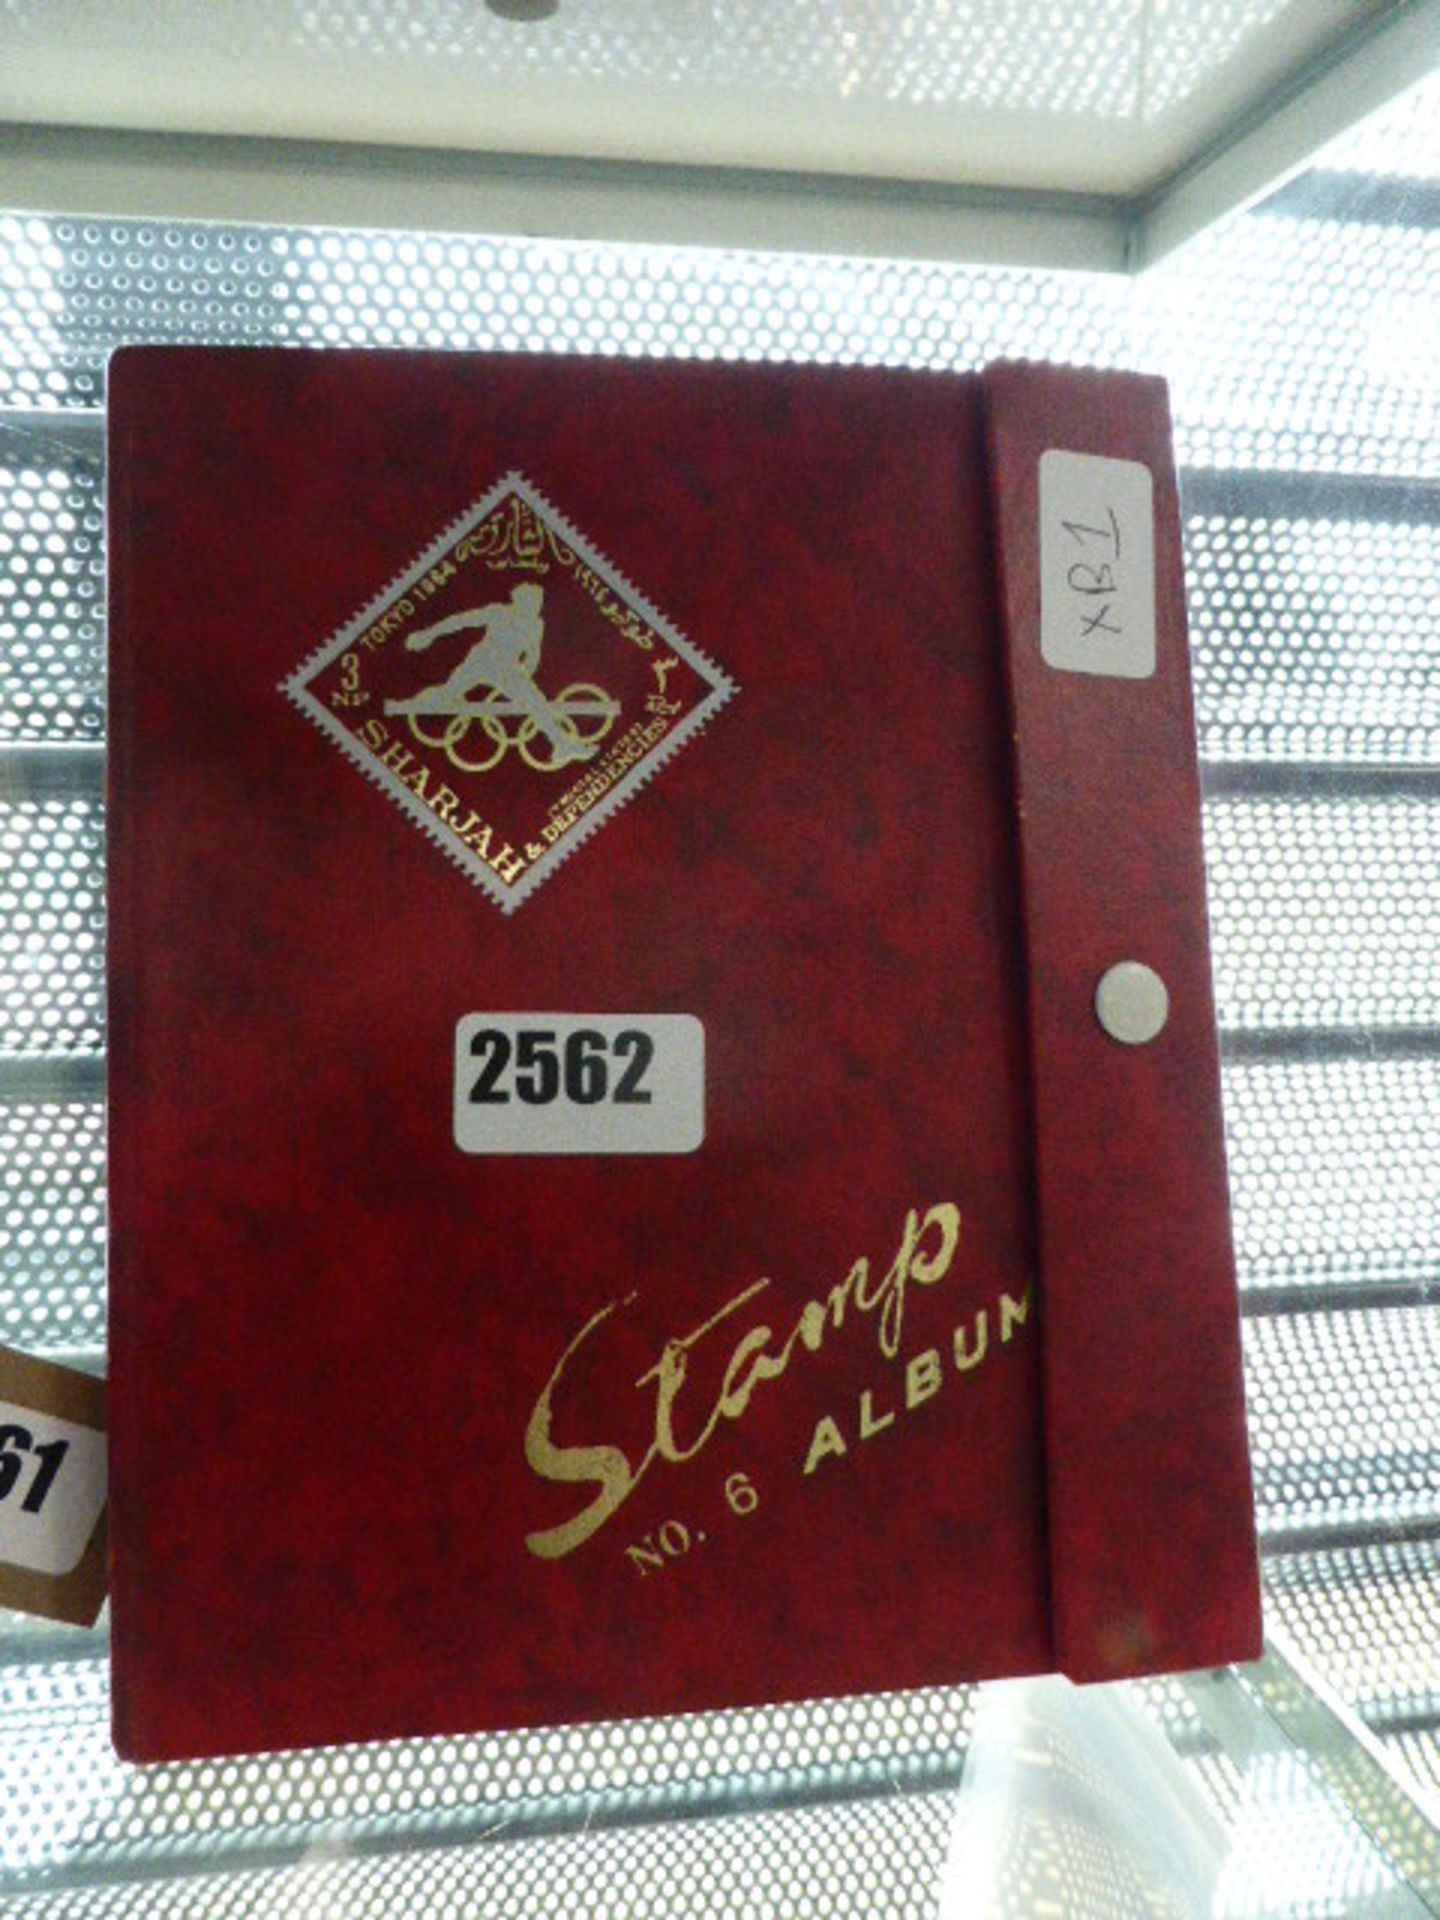 No. 6 stamp album and various world stamps